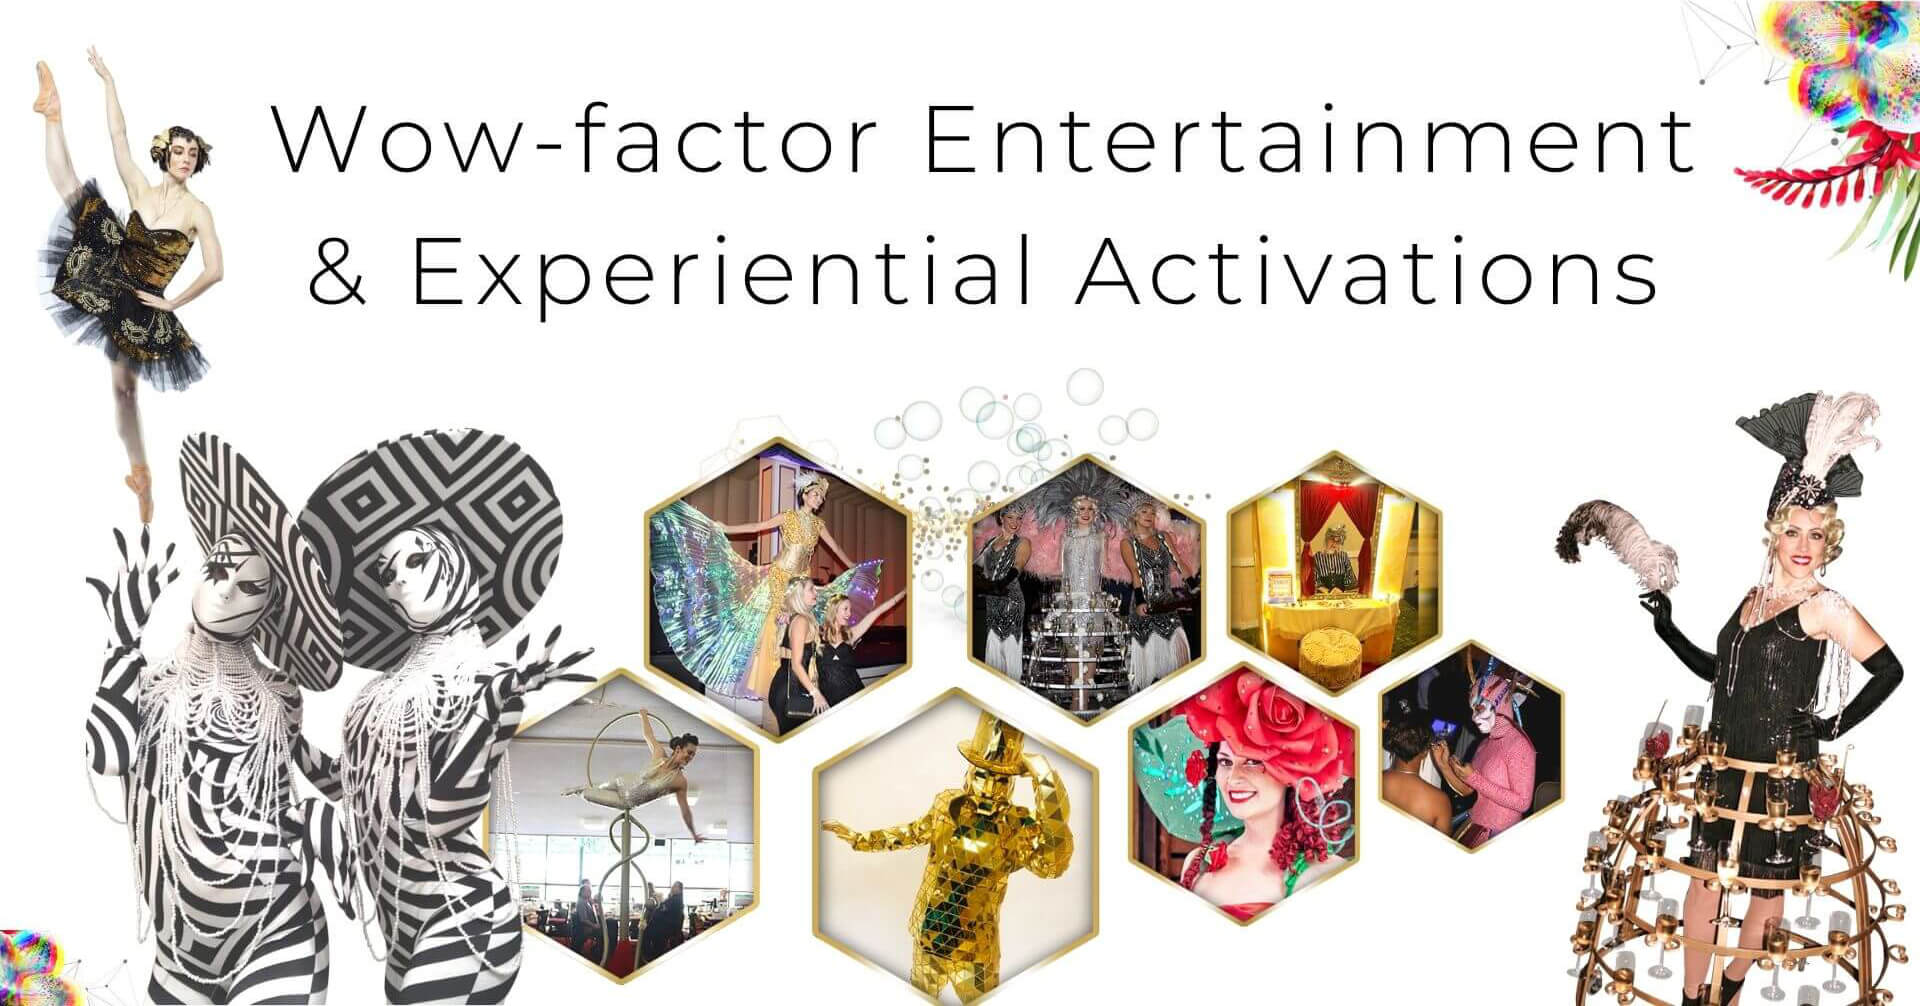 Catalyst Arts elevates celebrations with wow-factor entertainment & experiential activations